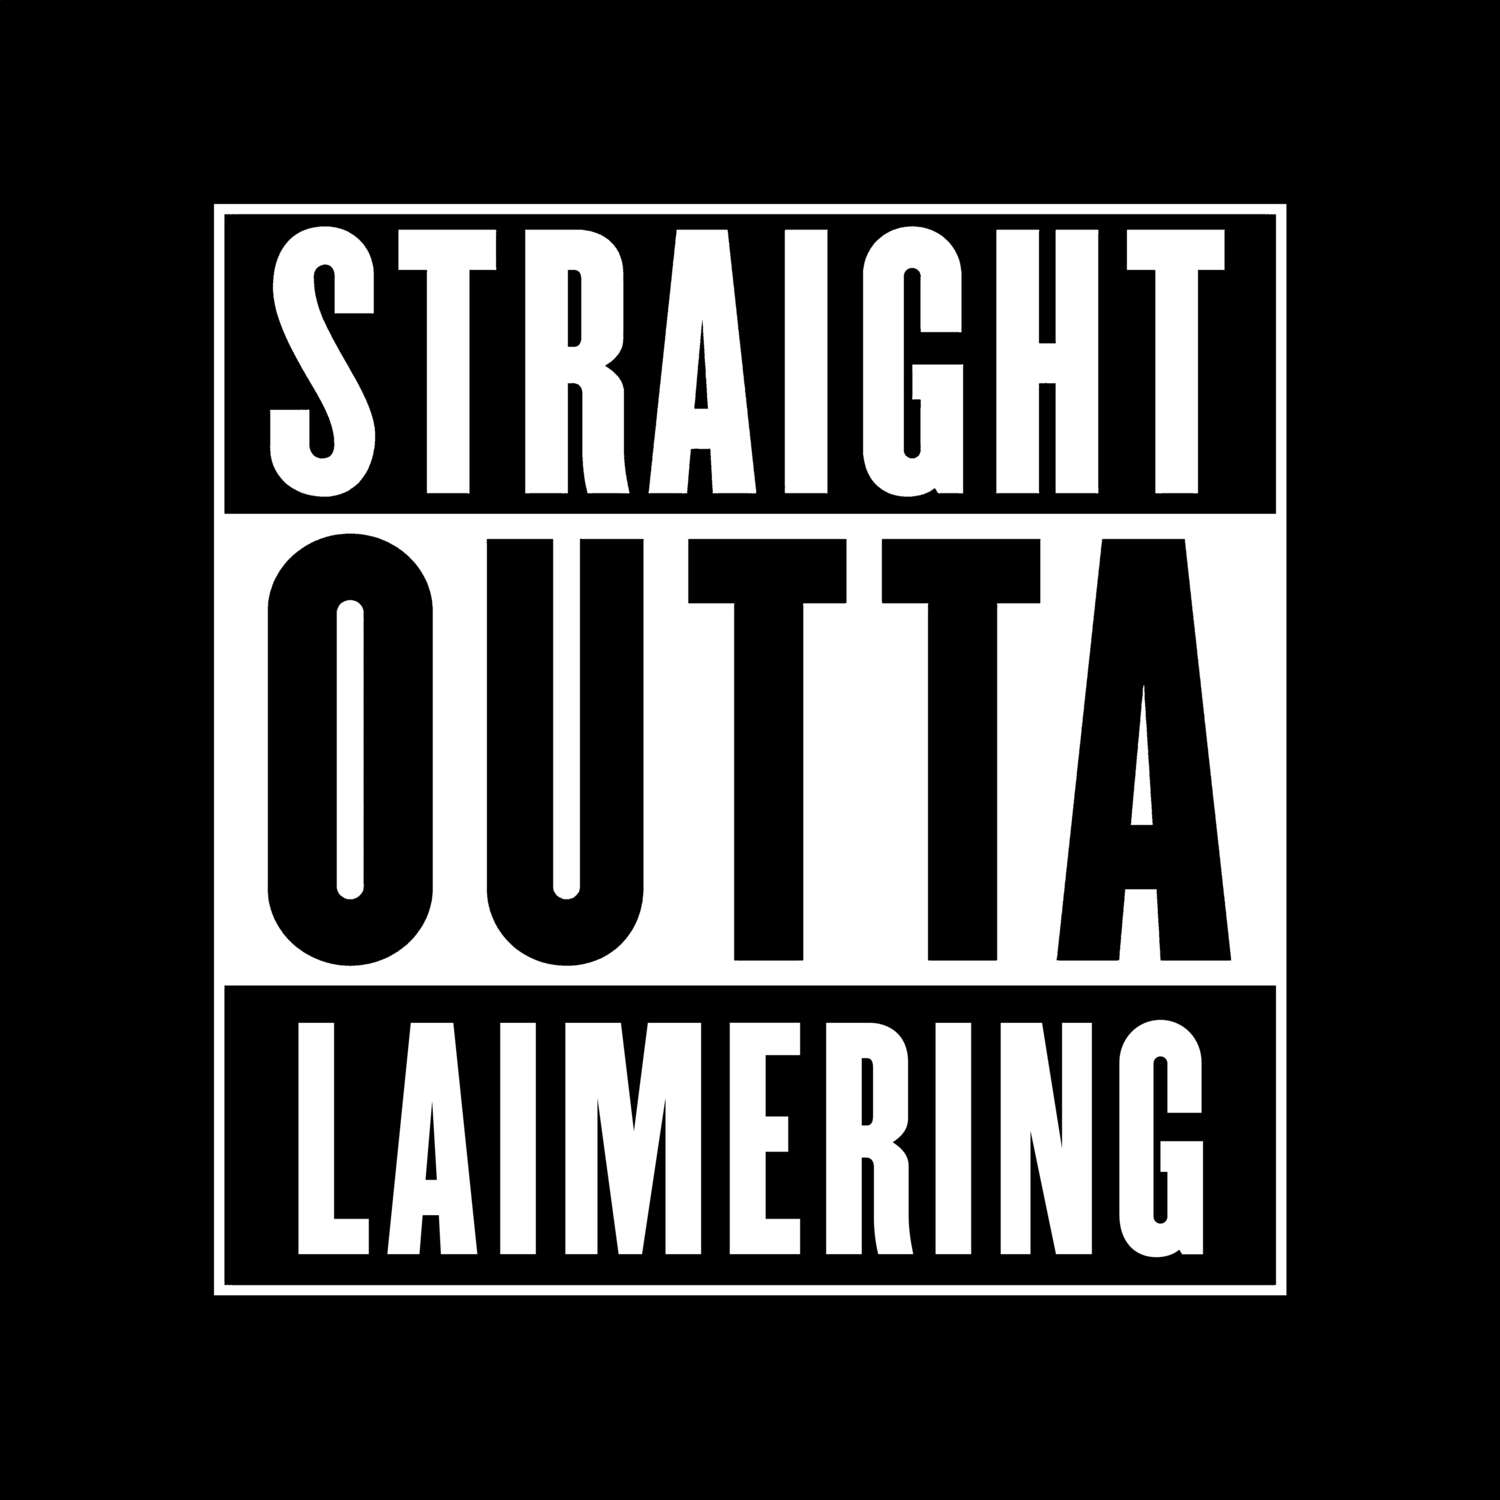 Laimering T-Shirt »Straight Outta«